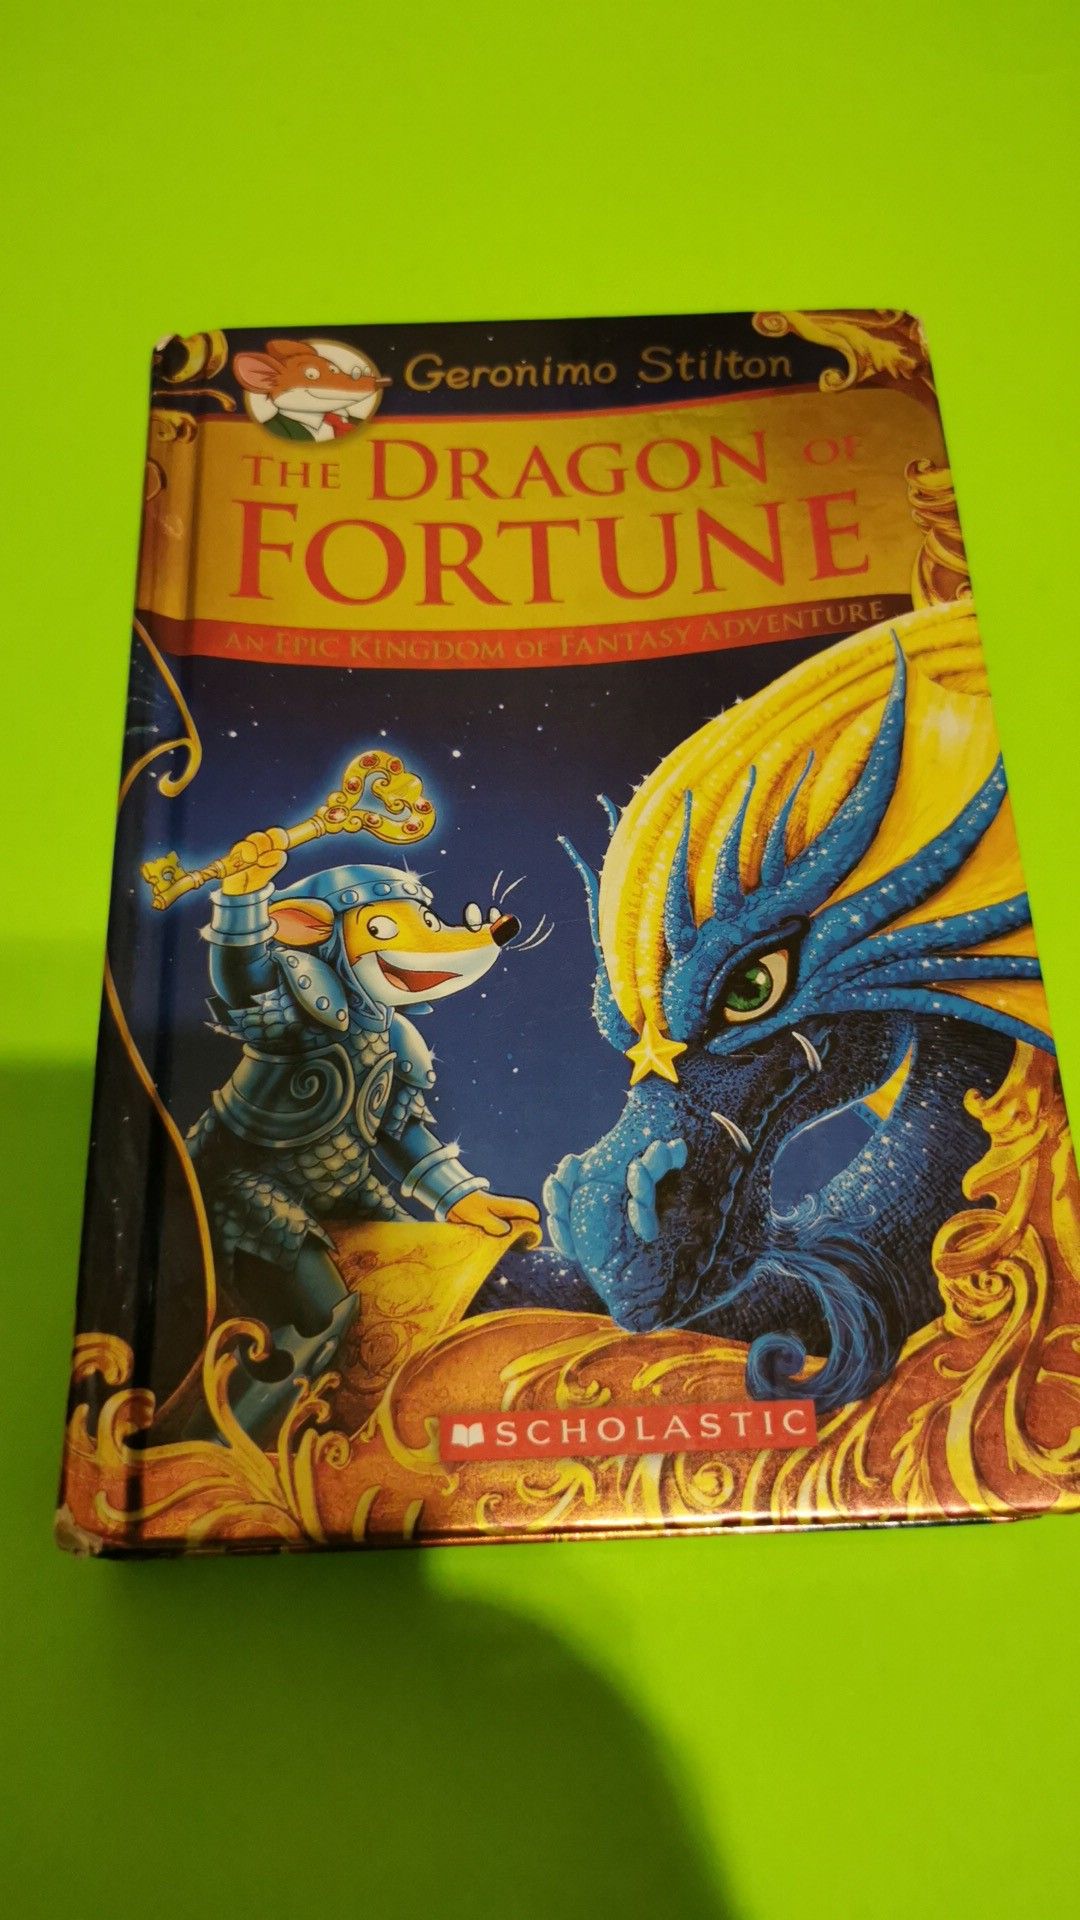 The Dragon of Fortune by Geronimo Stilton